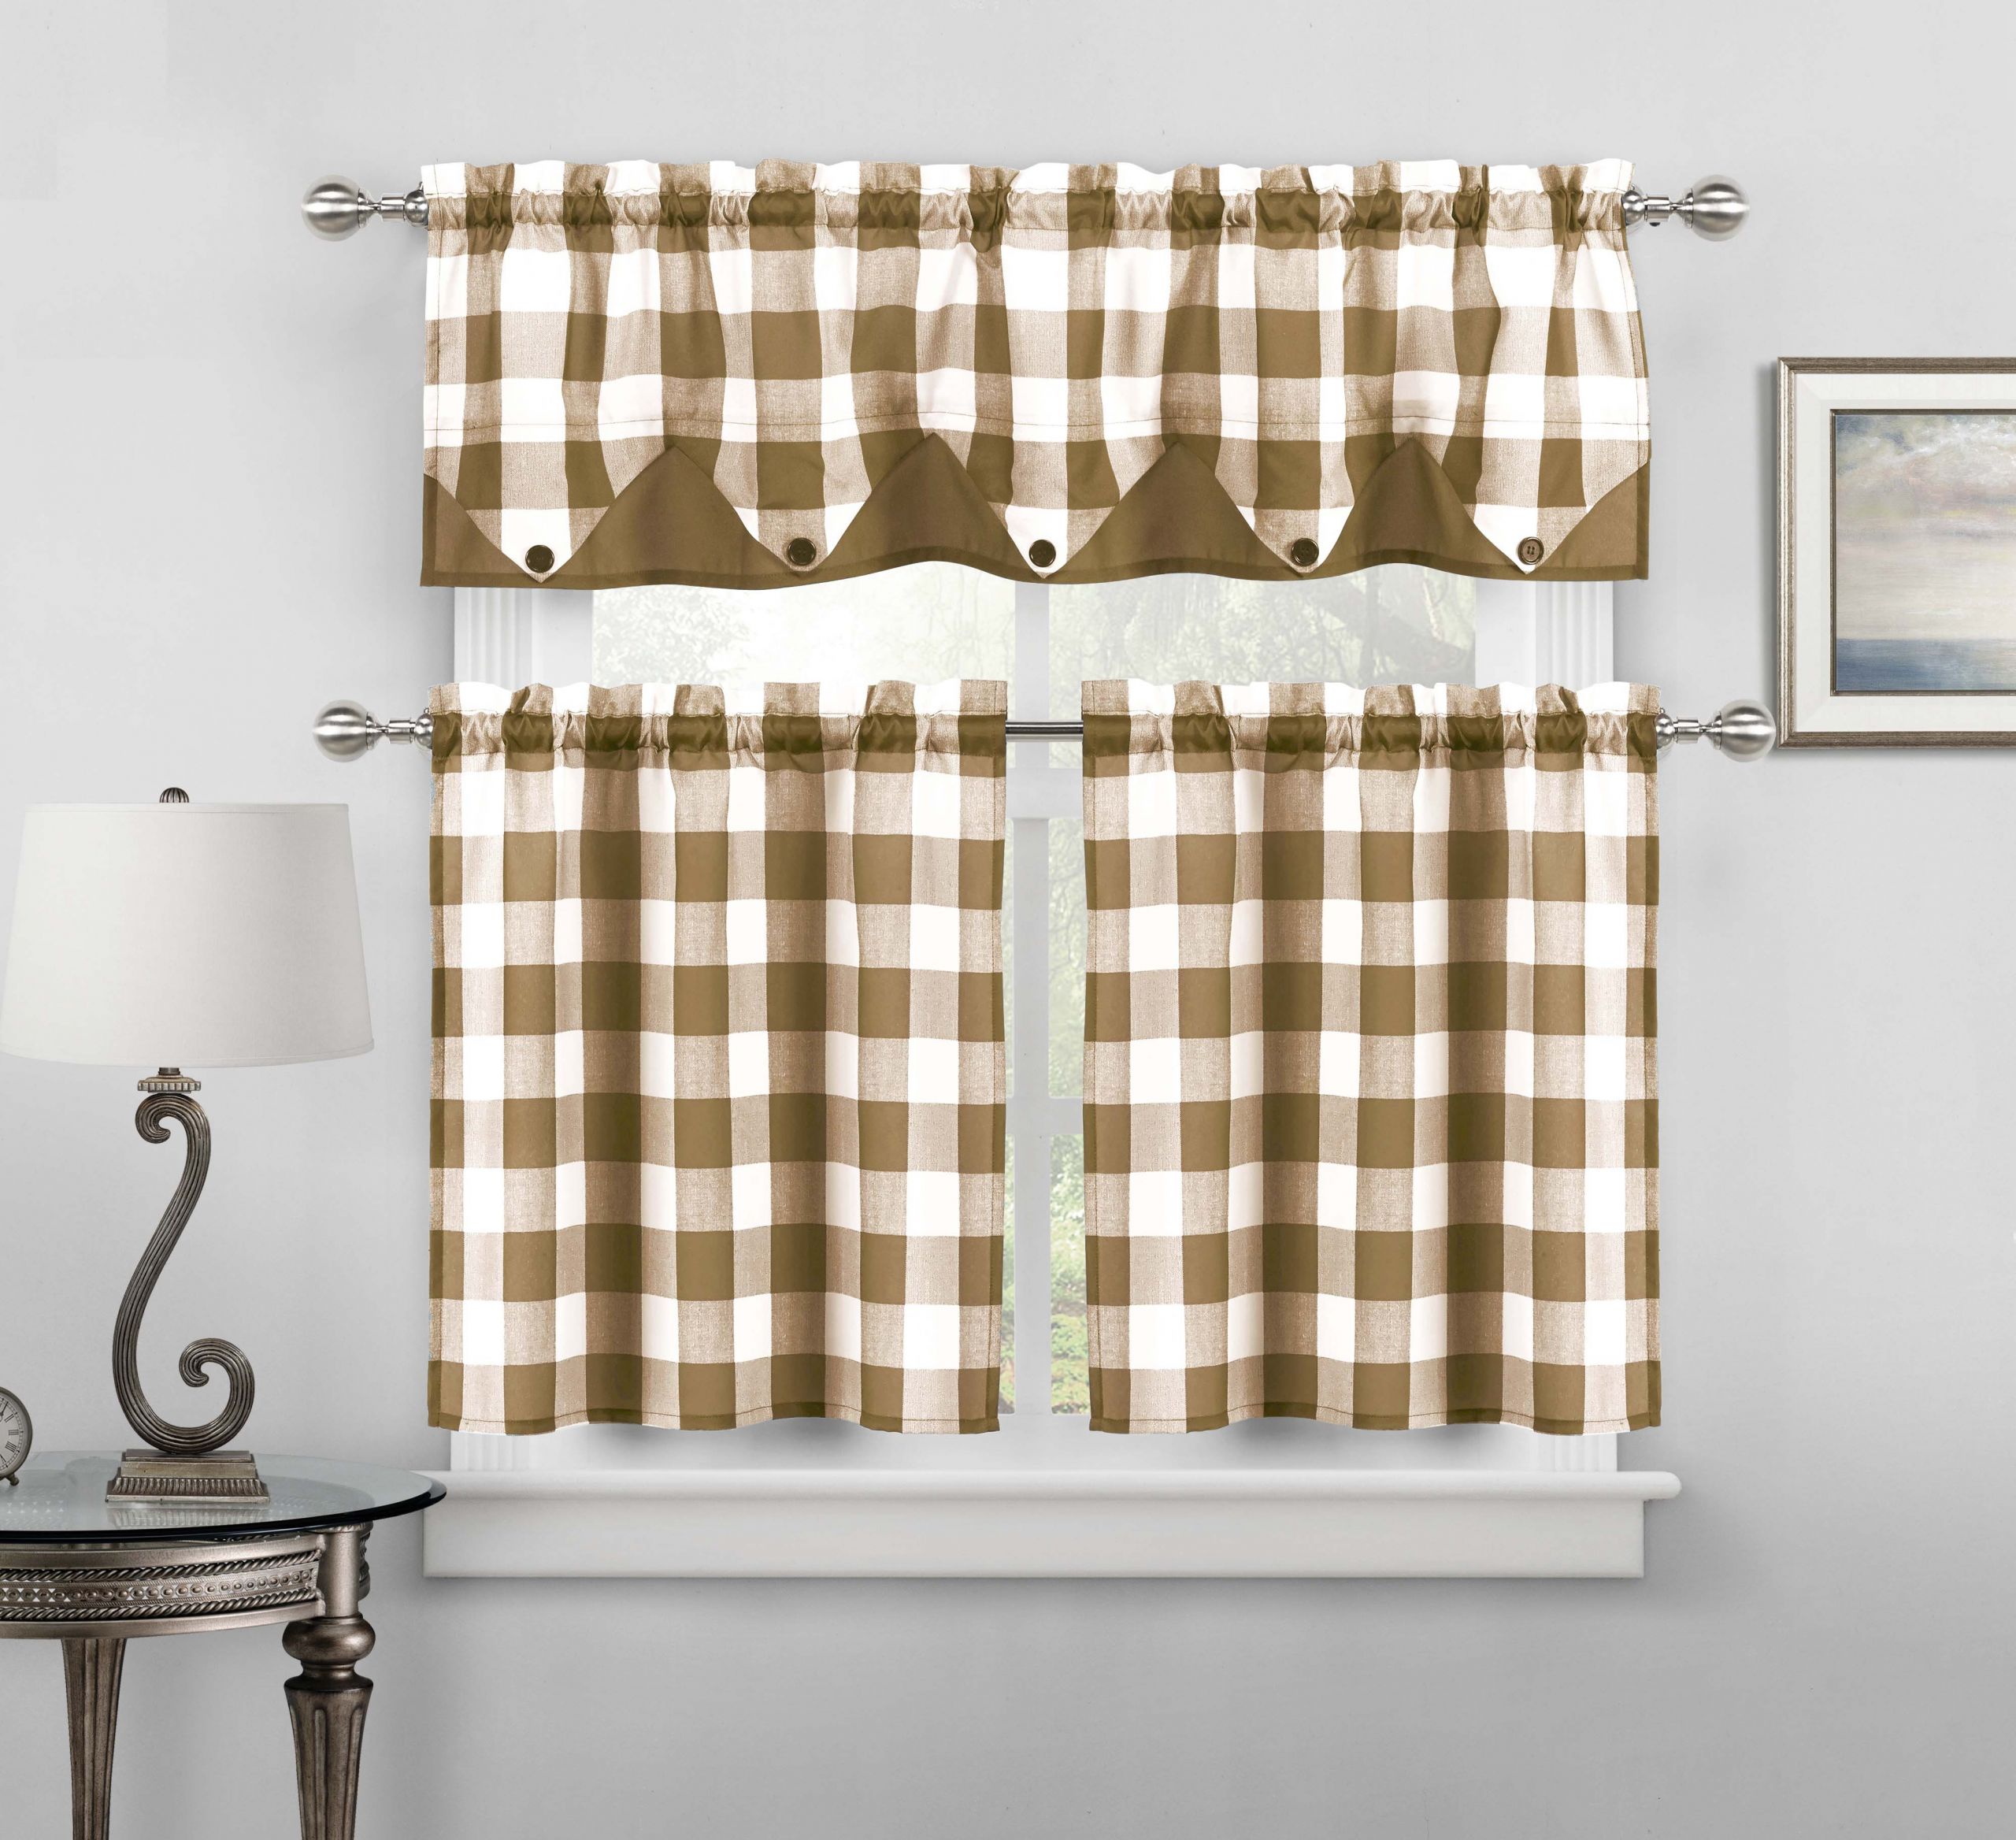 Kitchen Tier Curtains
 Sheer Small Taupe and White Three Piece Kitchen Cafe Tier